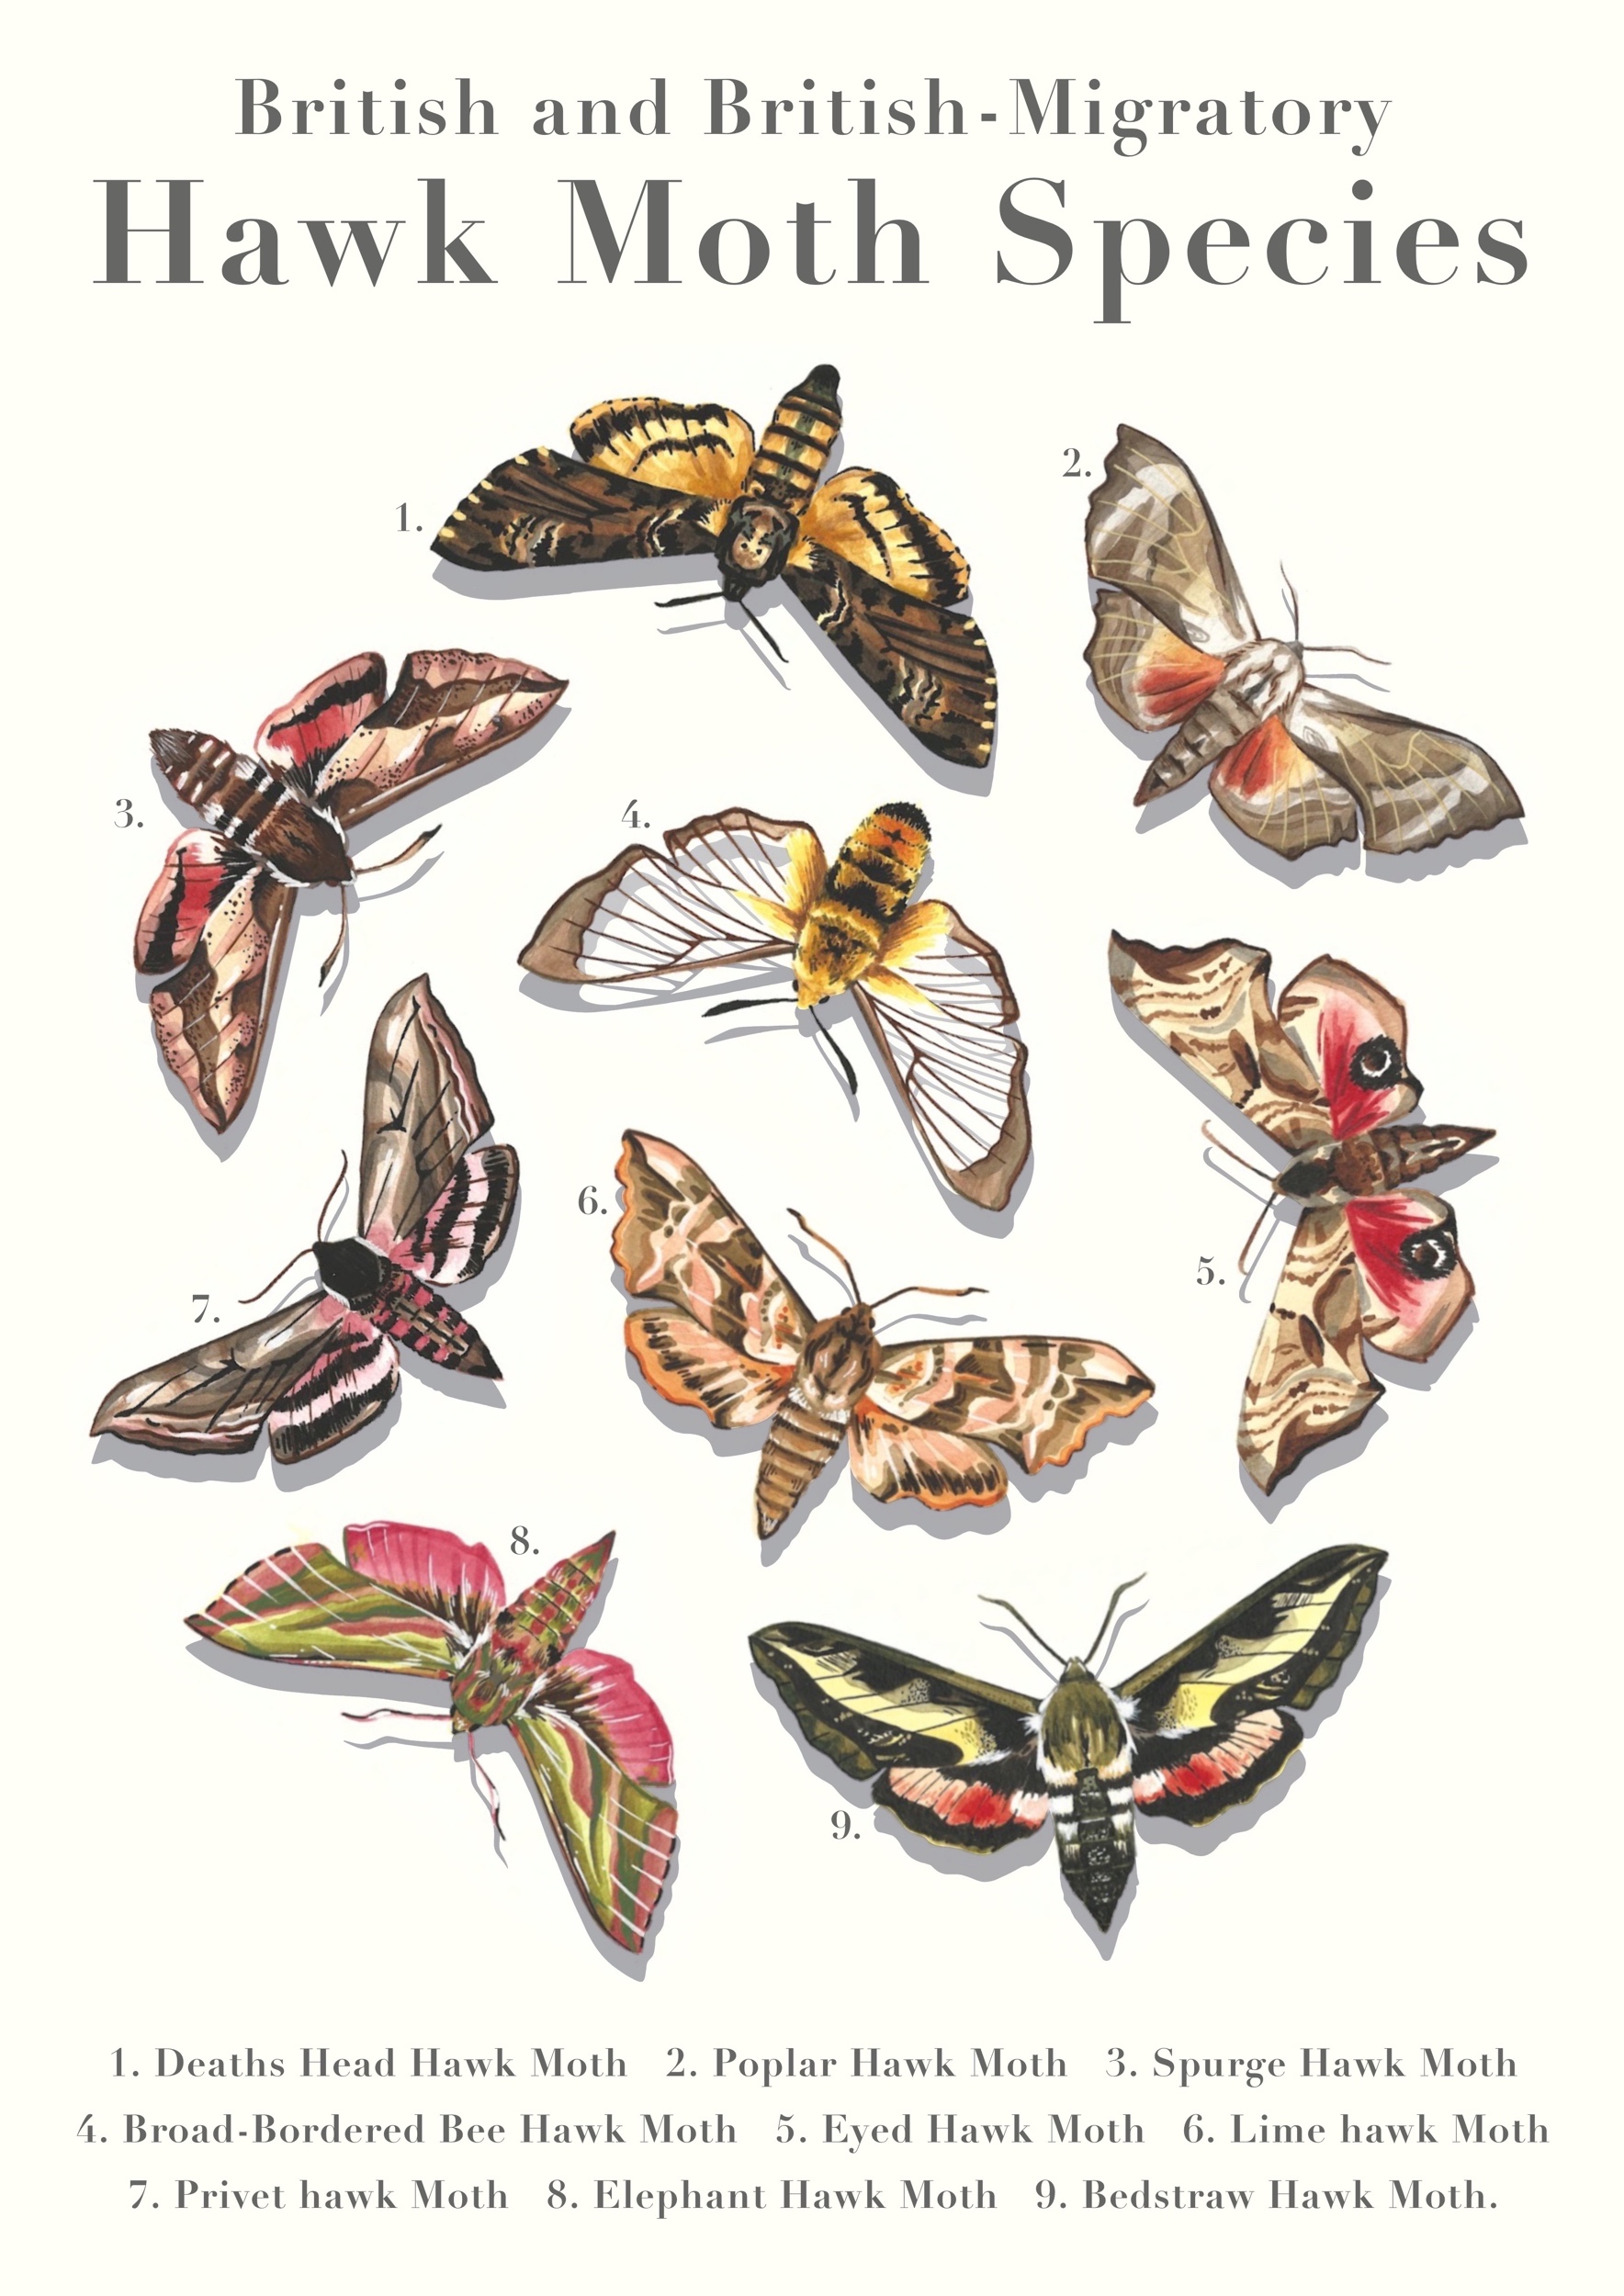 Illustration by Grace Bastion, showing nine moths in a collage, with a title and species names.